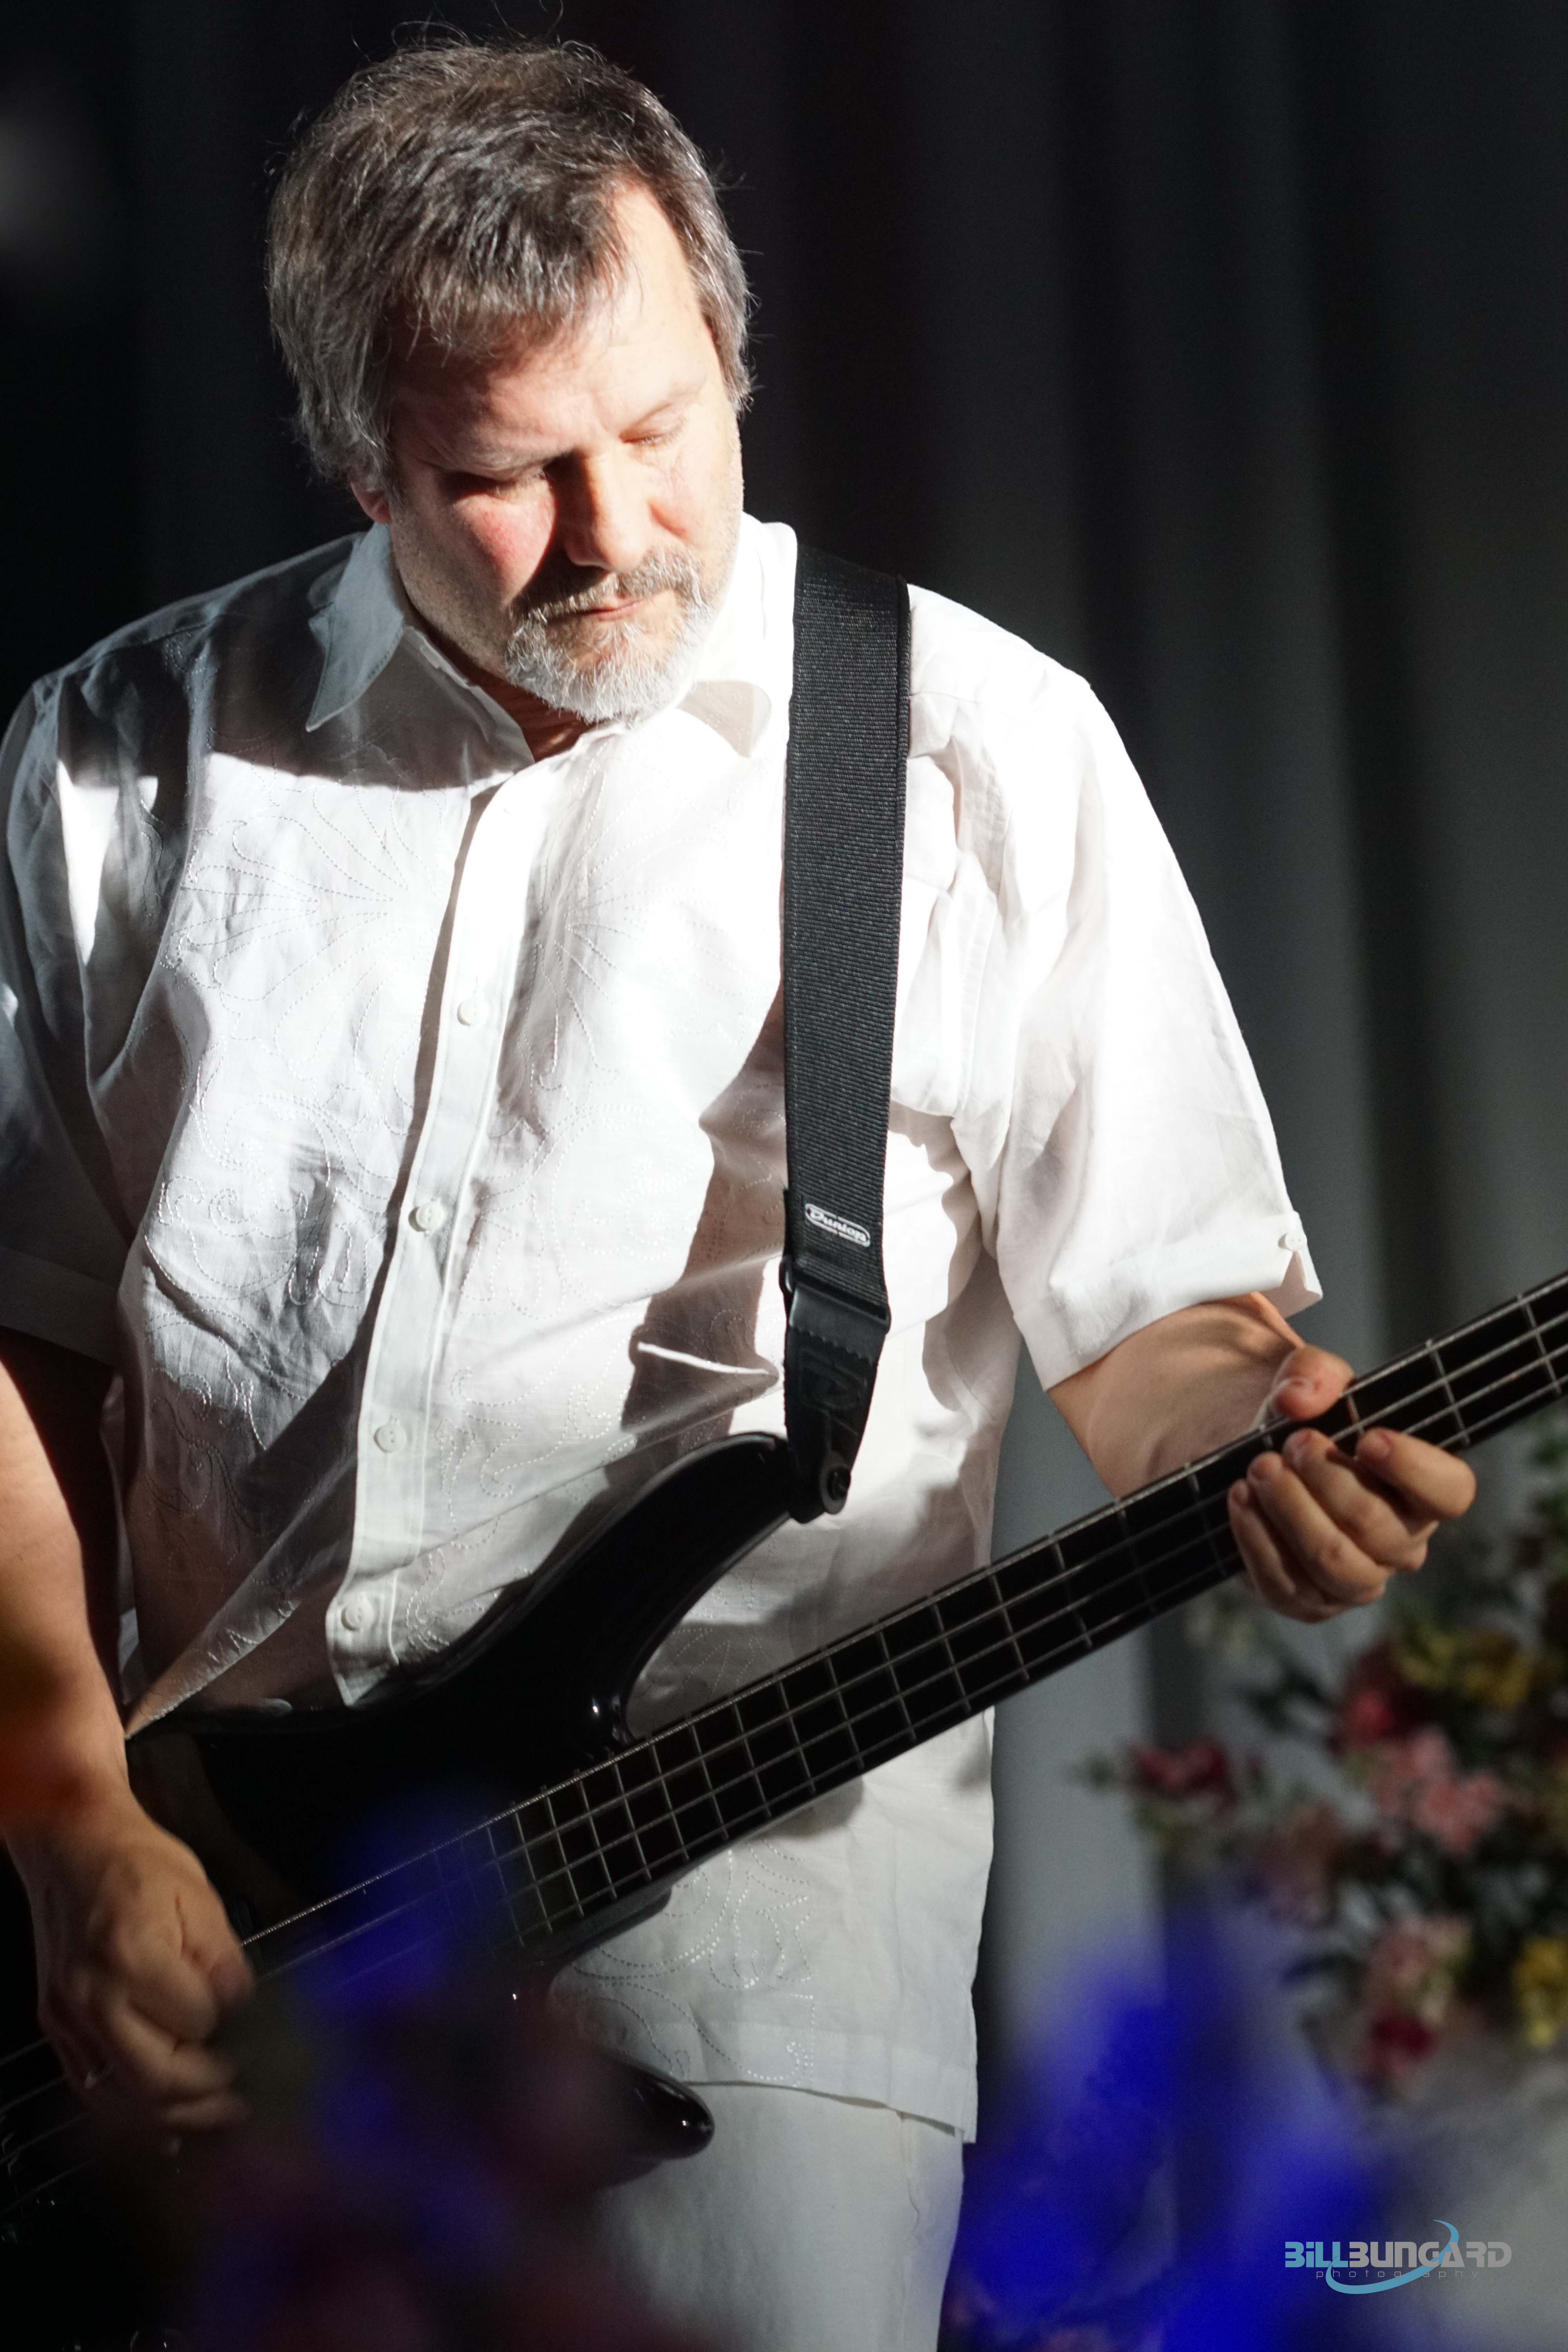 Billy Gould of Faith No More at The Paramount (Photo by Bill Bungard)